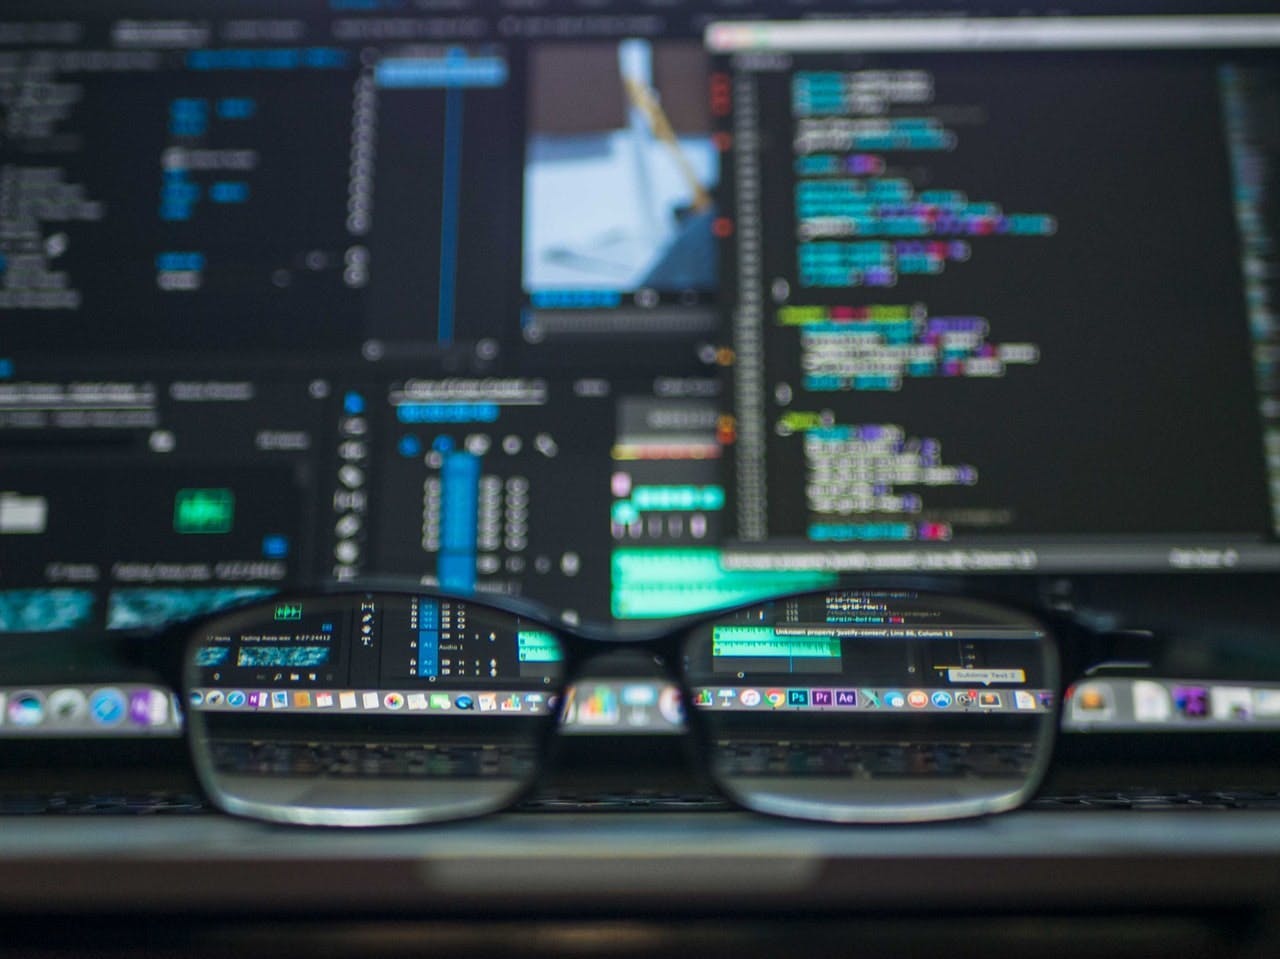 Glasses rest on a laptop keyboard, with computer screens displaying colorful programming code and software interfaces in the background, giving a blurred effect through the lenses.